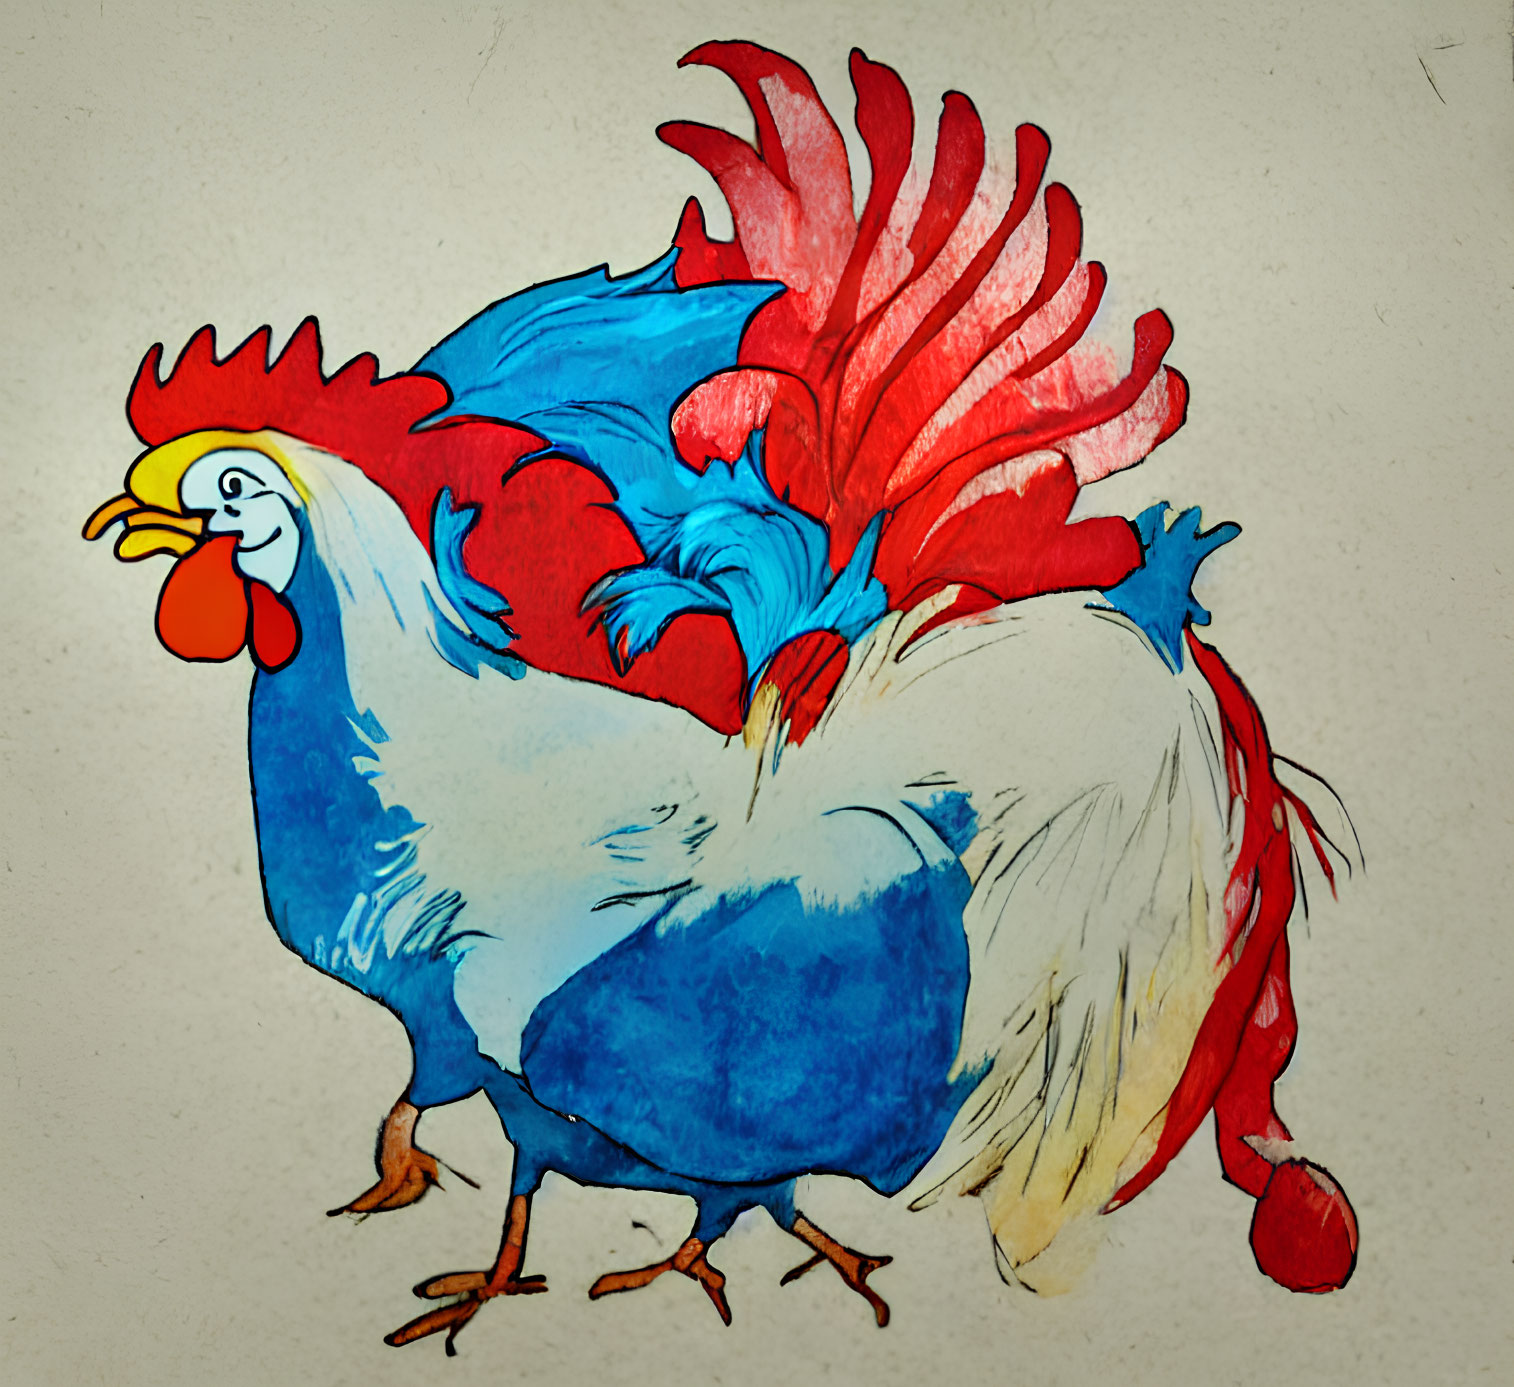 Vibrant Rooster Illustration with Colorful Features